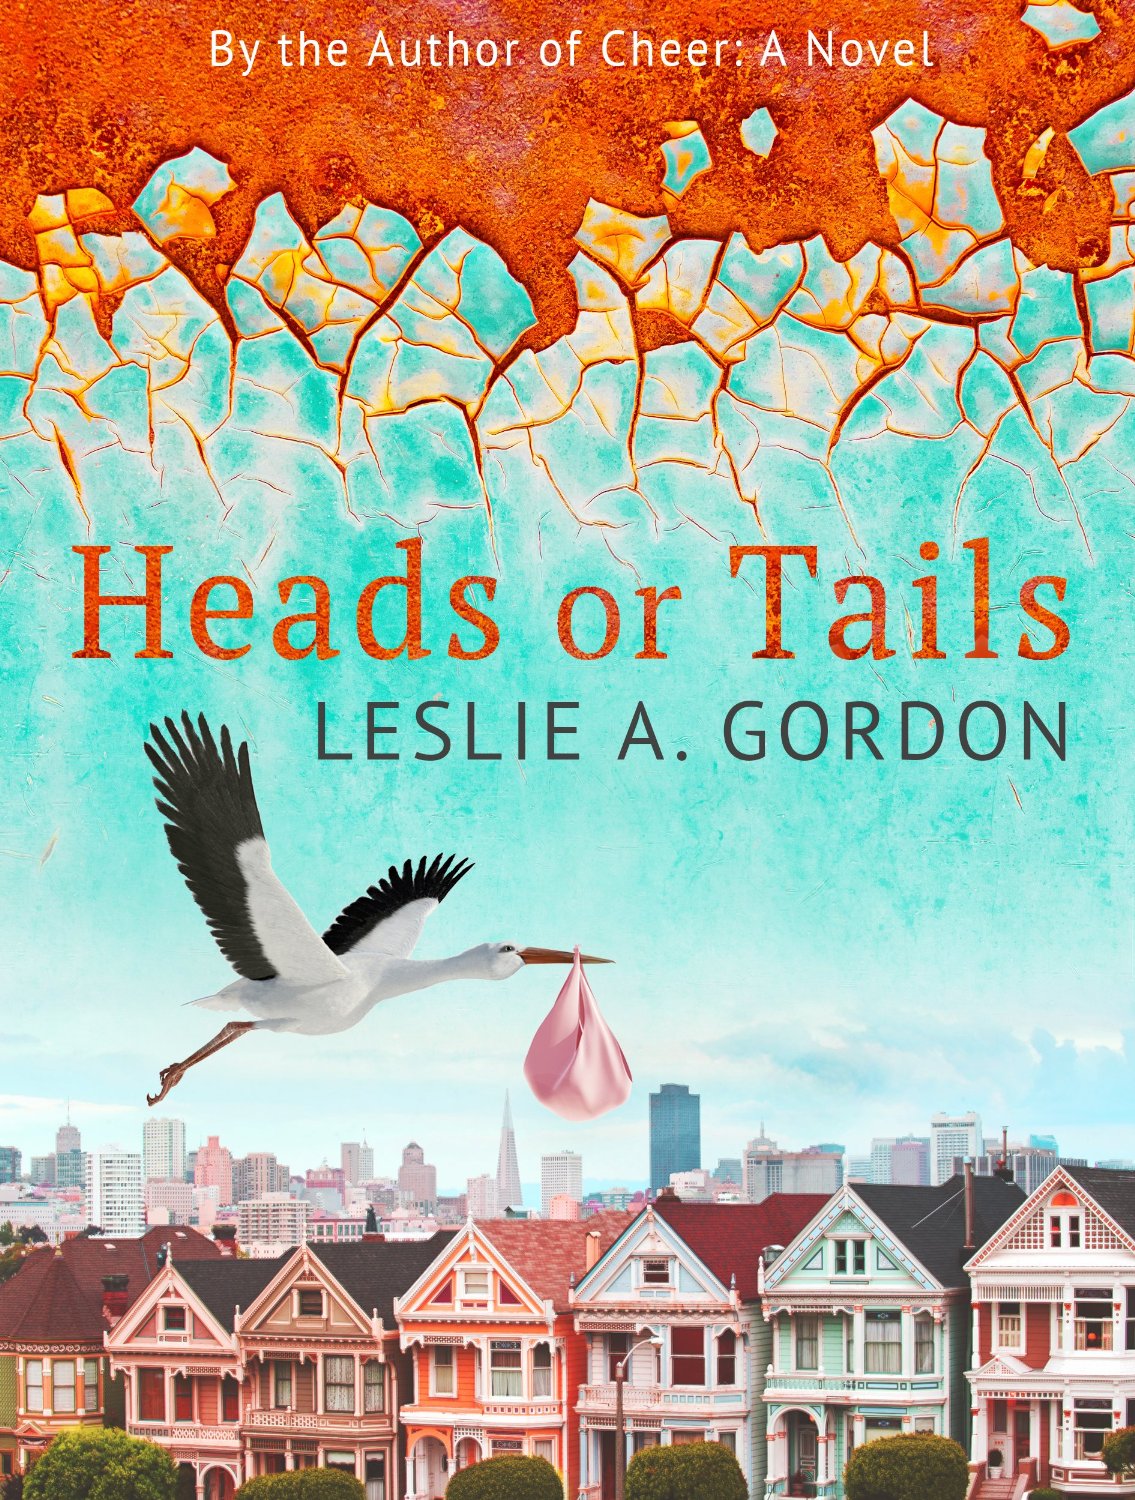 Heads or Tails by Leslie A. Gordon